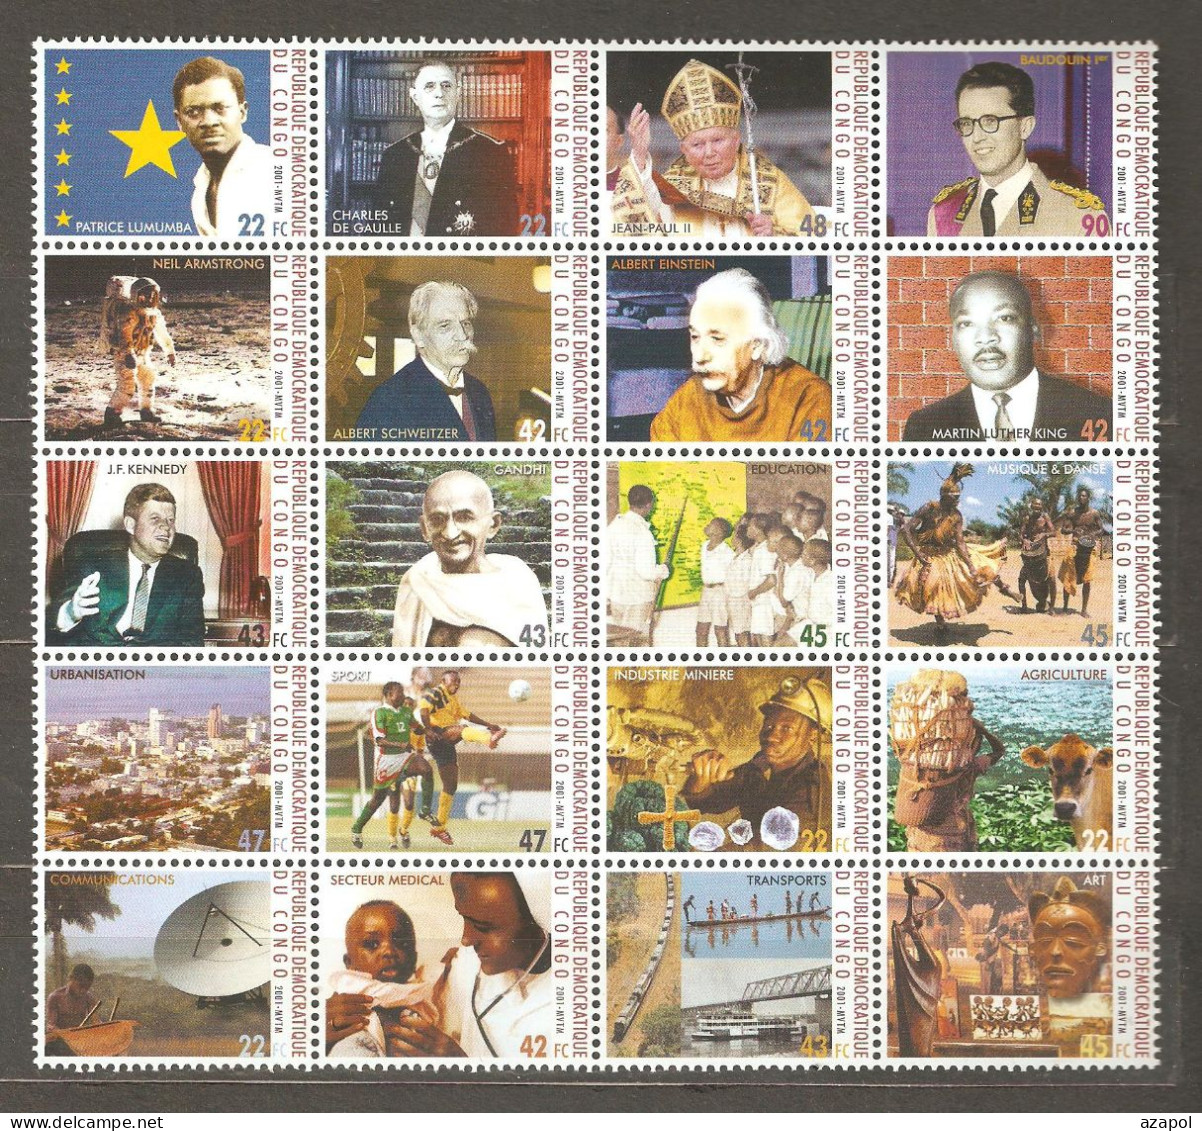 Congo: Full Set Of 20 Mint Stamps In Sheet, Famouse People & Events In 20-th Century, 2001, MNH - Mint/hinged